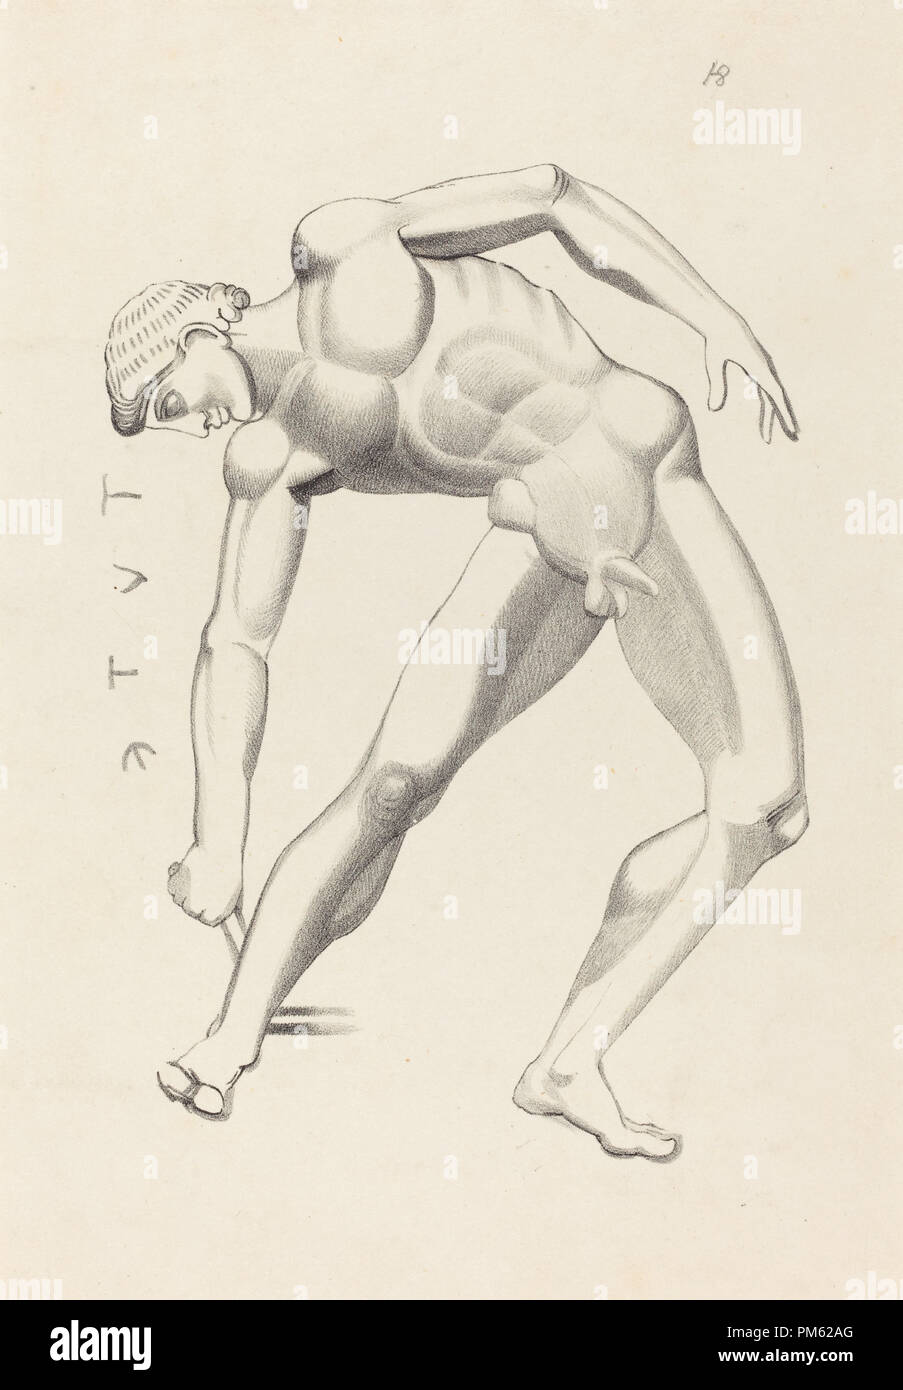 Tydaeus. Dated: published 1838. Medium: lithograph [proof before letters]. Museum: National Gallery of Art, Washington DC. Author: after John Flaxman. Stock Photo